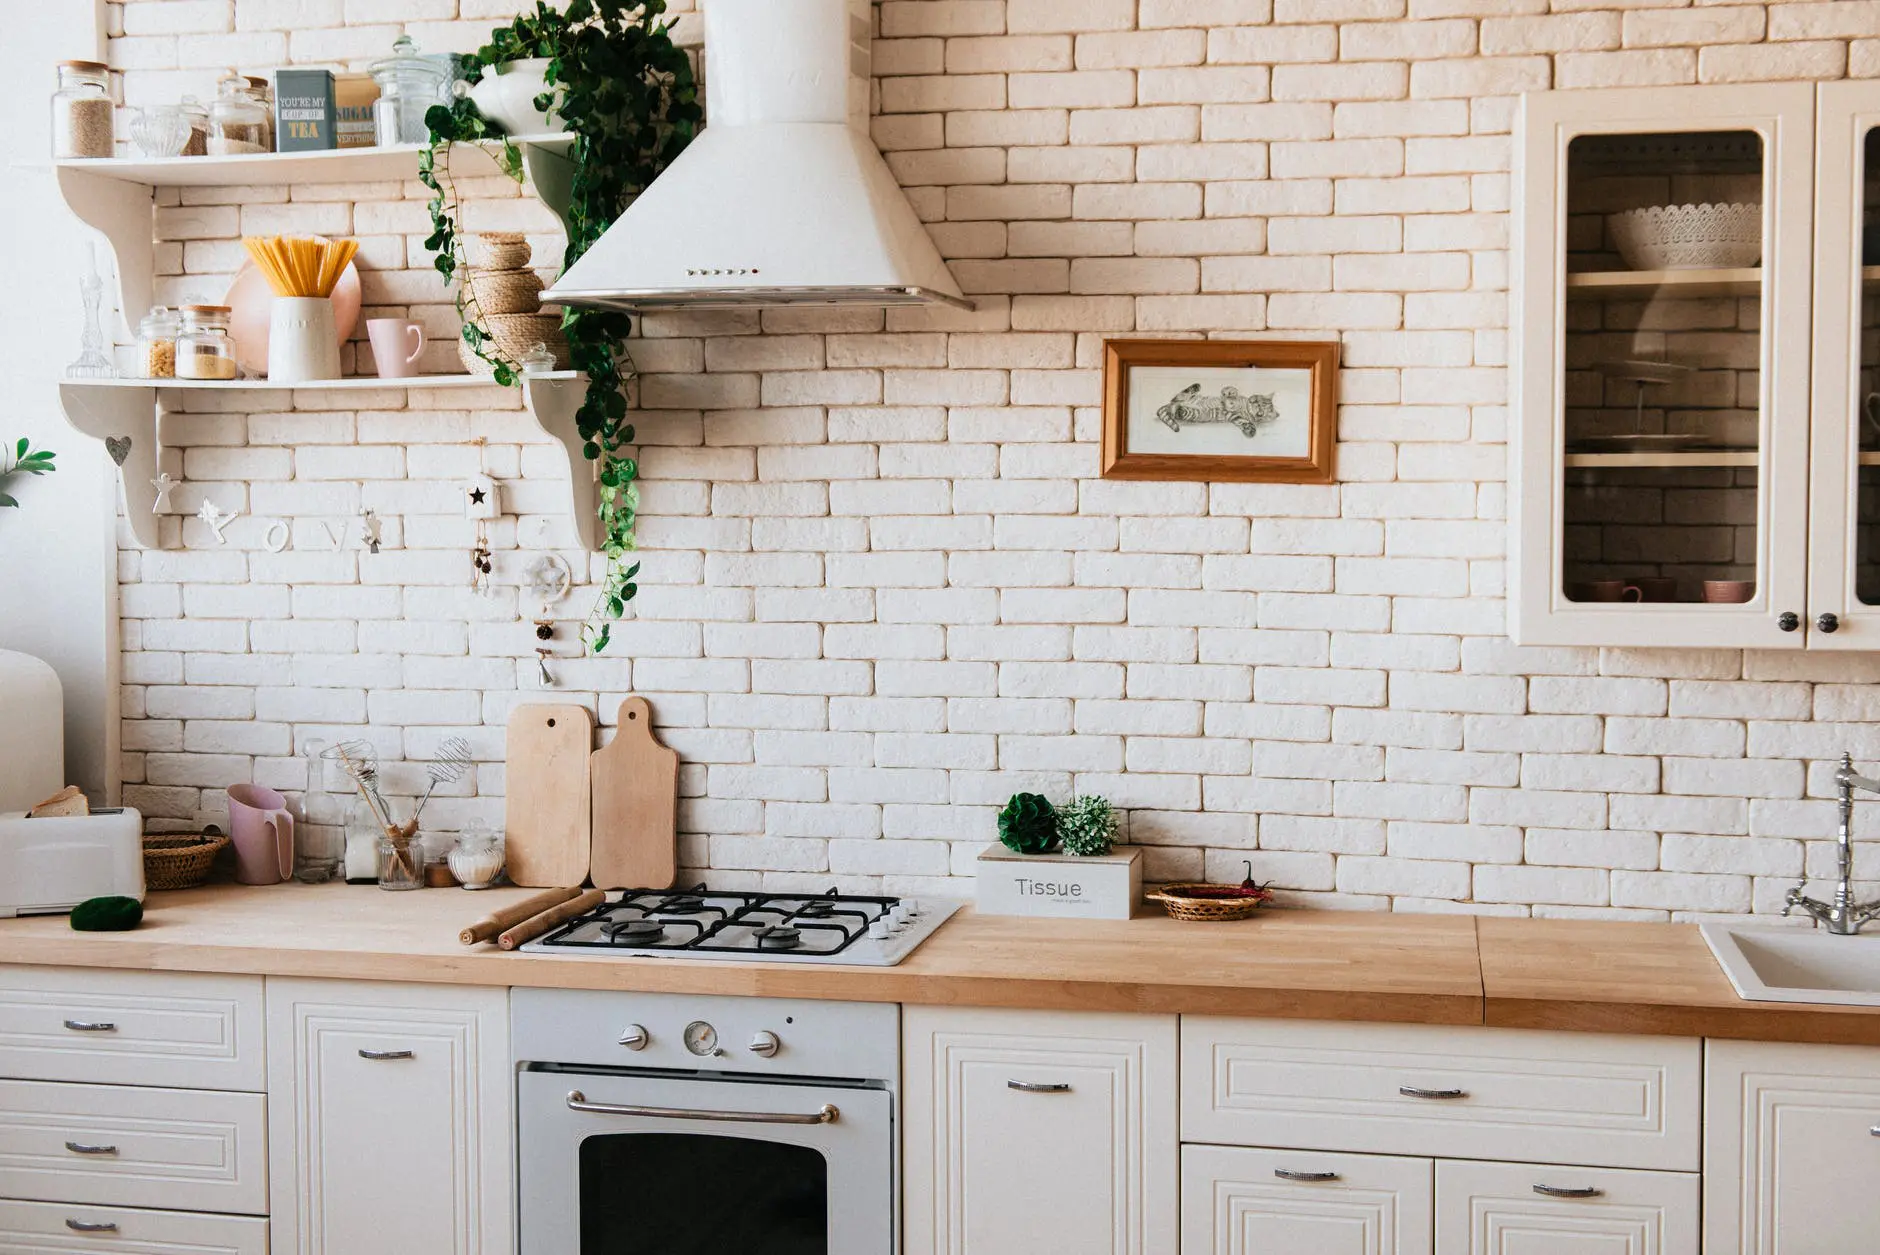 Small Kitchen Remodel Ideas For Your Next Remodeling Project